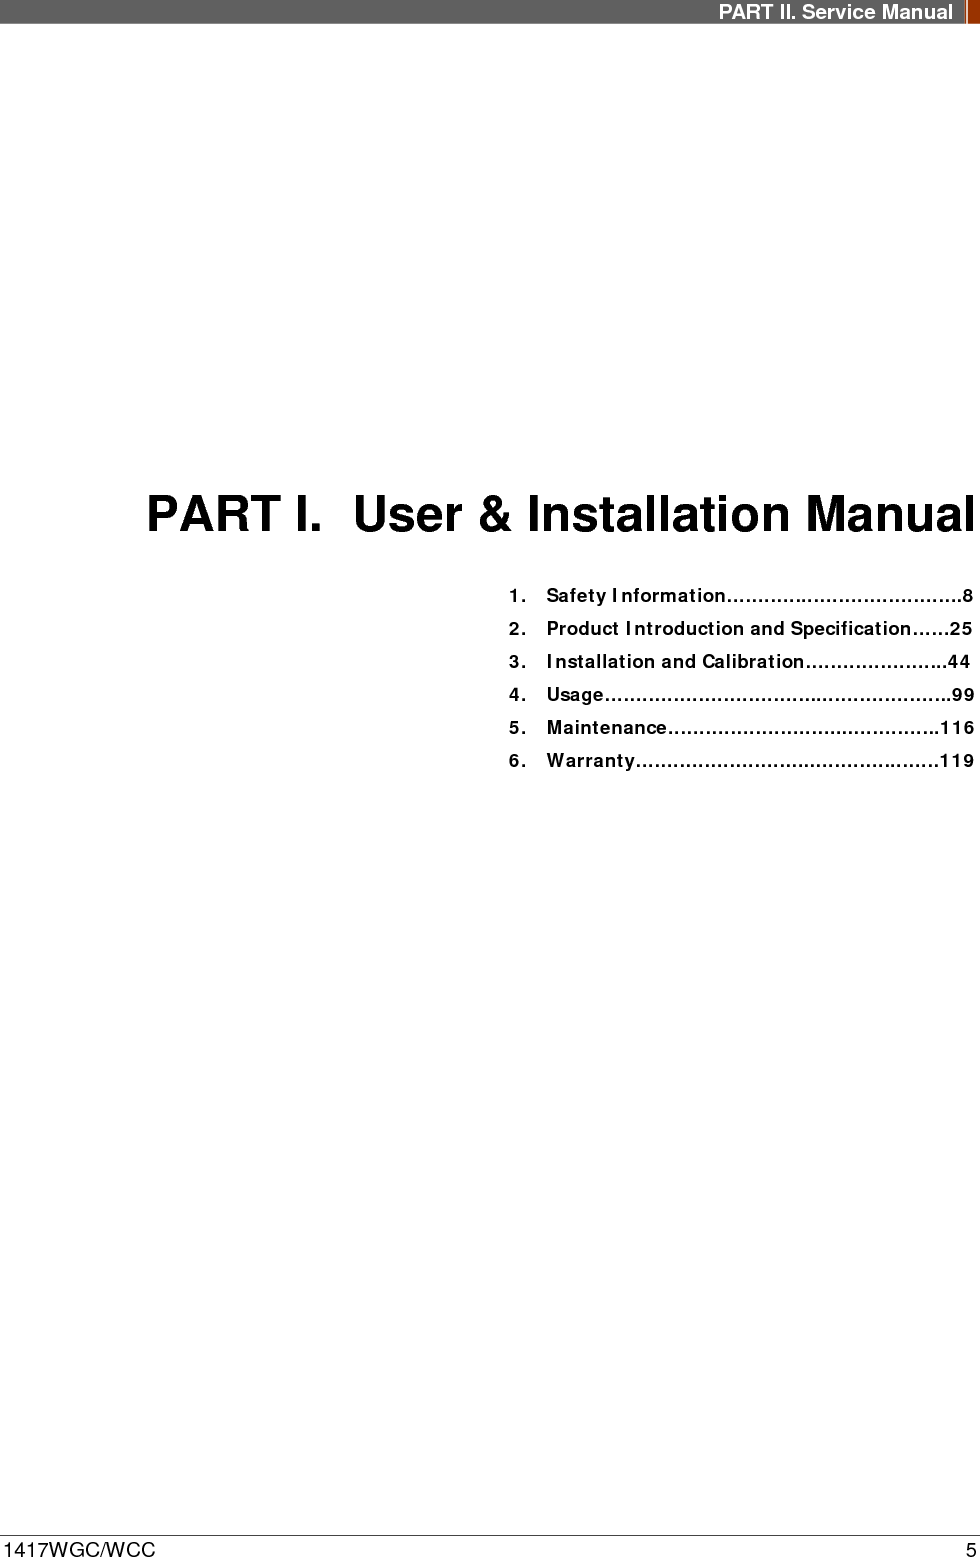 PART II. Service Manual  1417WGC/WCC  5 PART I. User &amp; Installation Manual 1. Safety Information………….…………………….8 2. Product Introduction and Specification……25 3. Installation and Calibration…………………..44 4. Usage……………………………...………………..99 5. Maintenance………………………...…………..116 6. Warranty………………………..…………..……119         